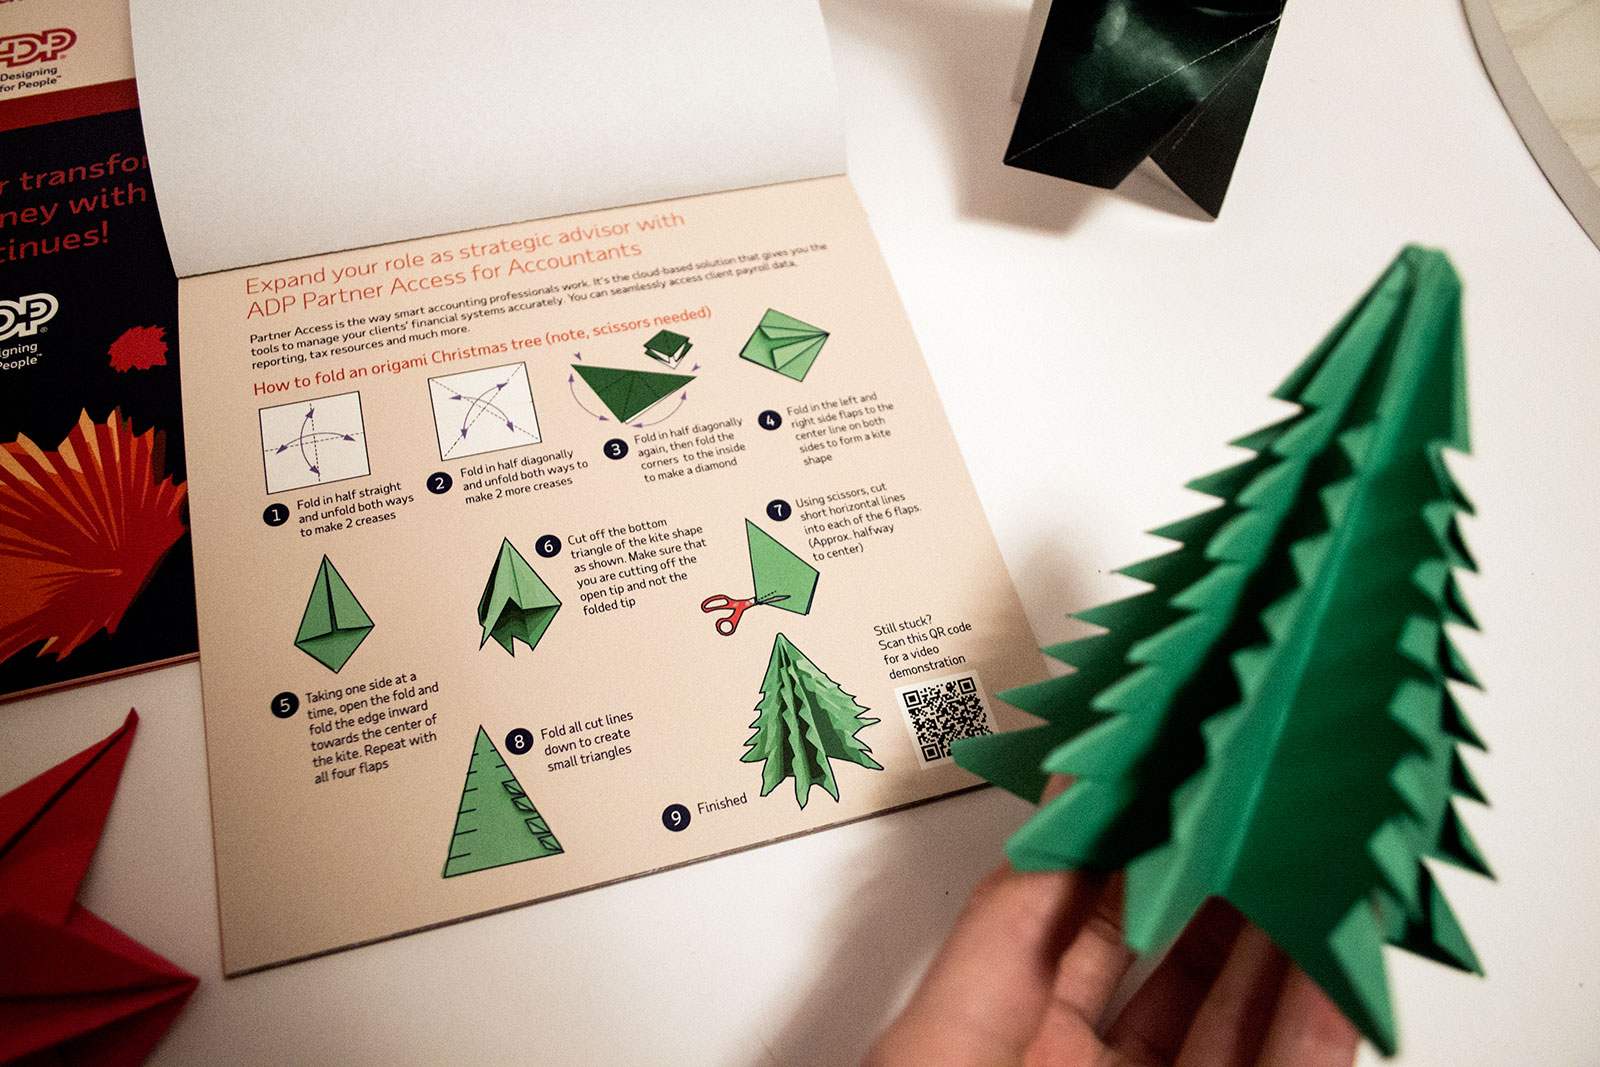 inside page instructions for folding an Origami christmas tree, with me holding a folded tree out of focus next to it